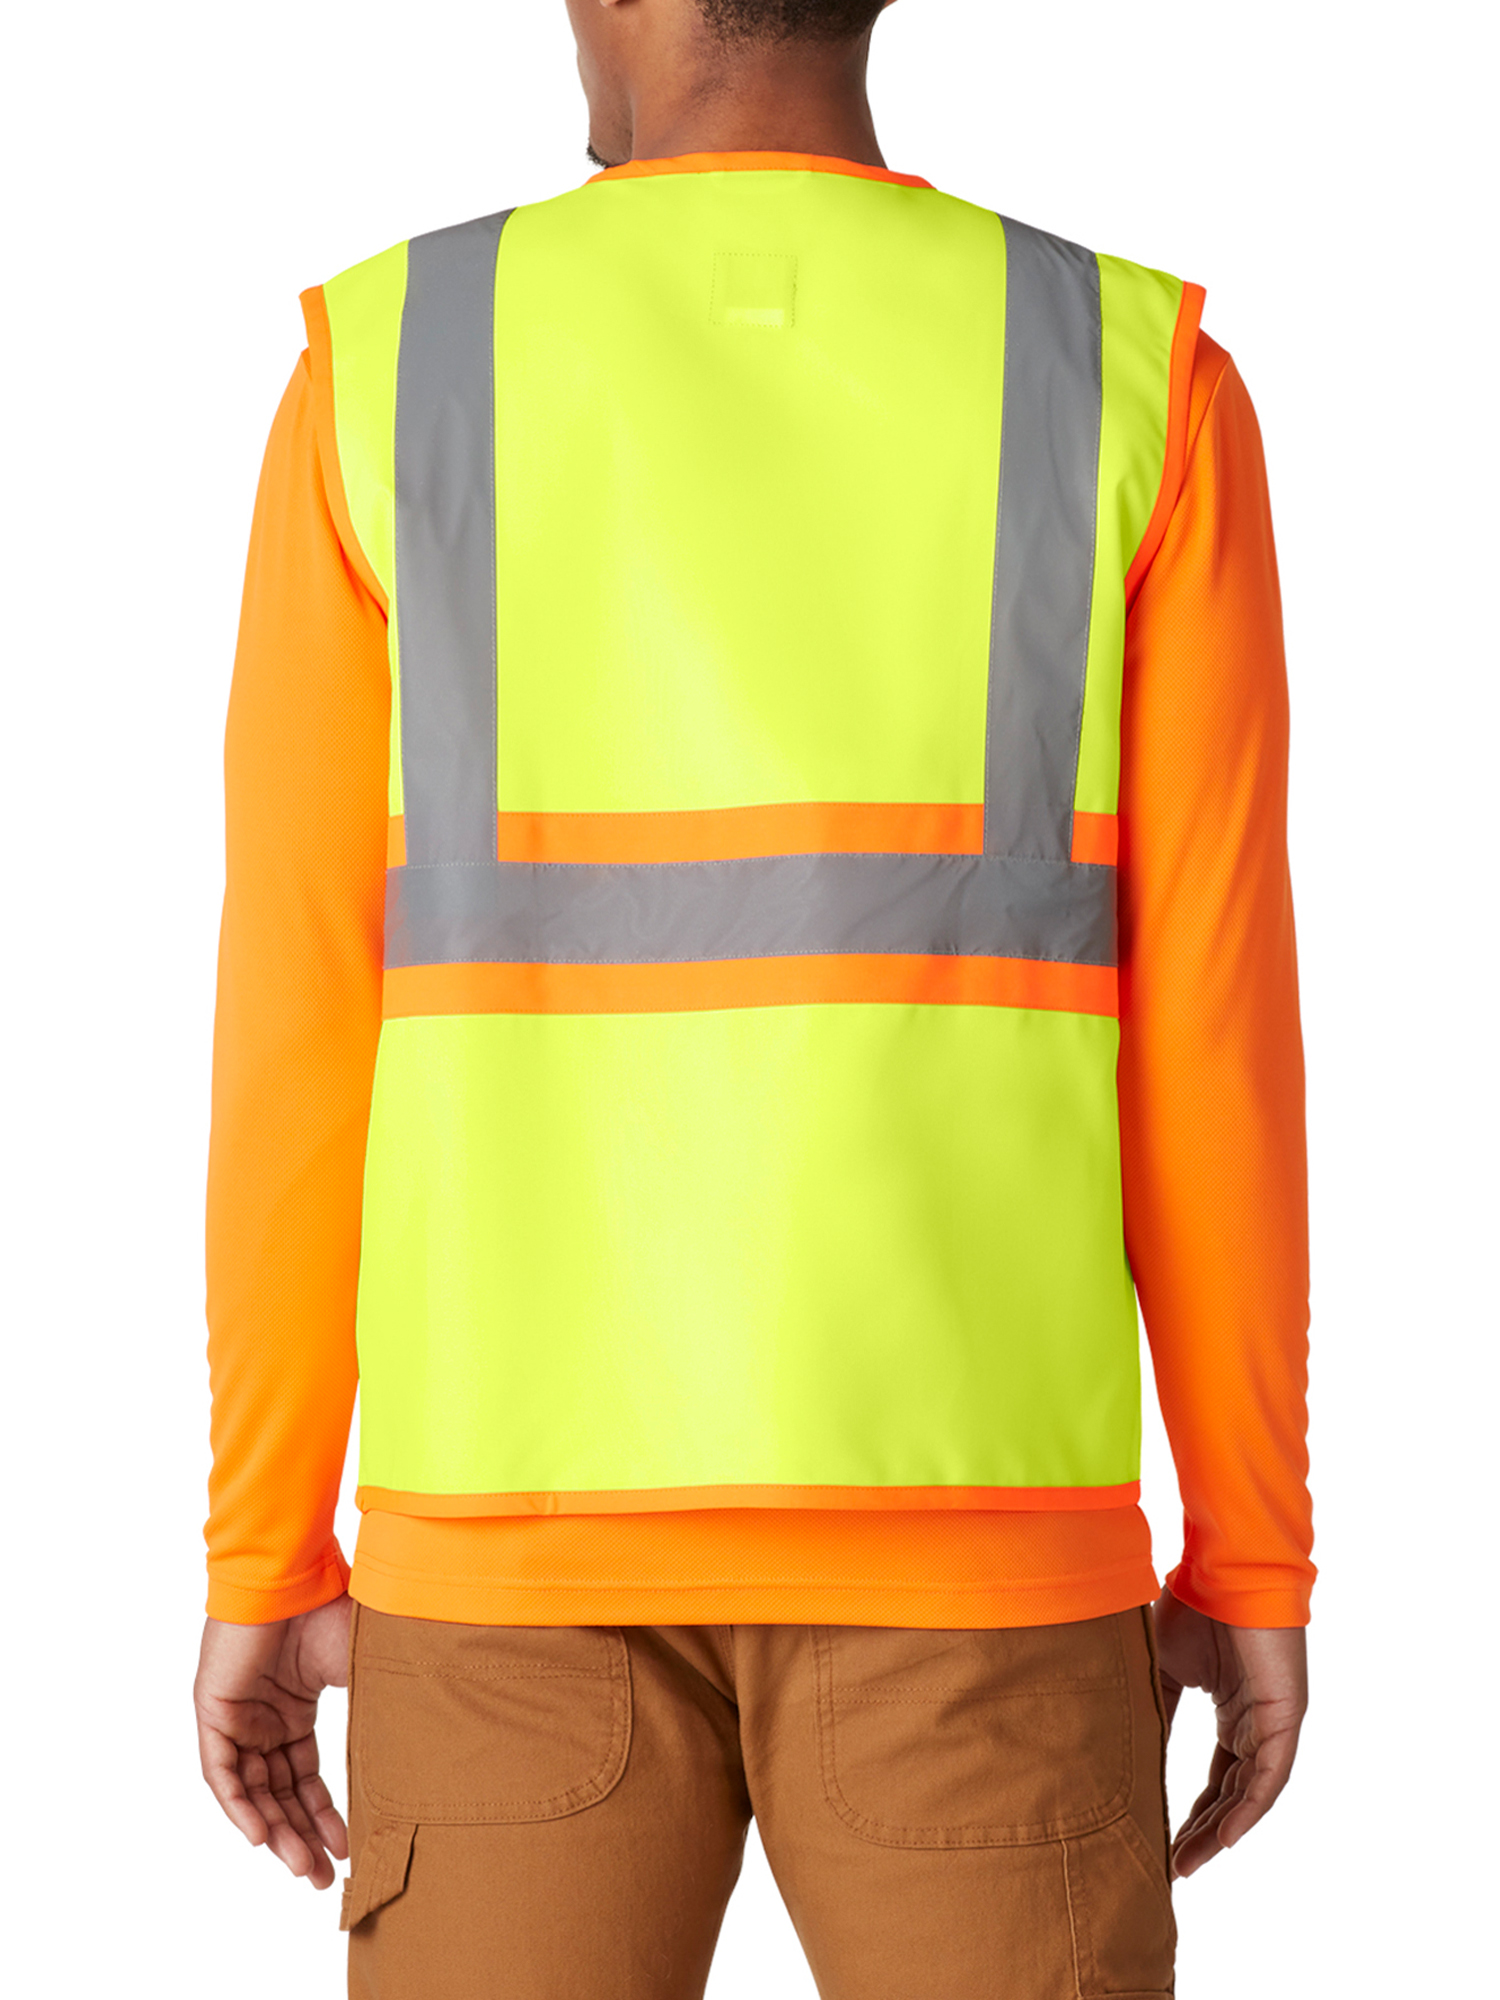 Genuine Dickies Safety Vest, Hi-Vis Synthetic Vest, 3M™ Scotchlite™ Reflective Taping, ANSI Class 2 - image 2 of 6